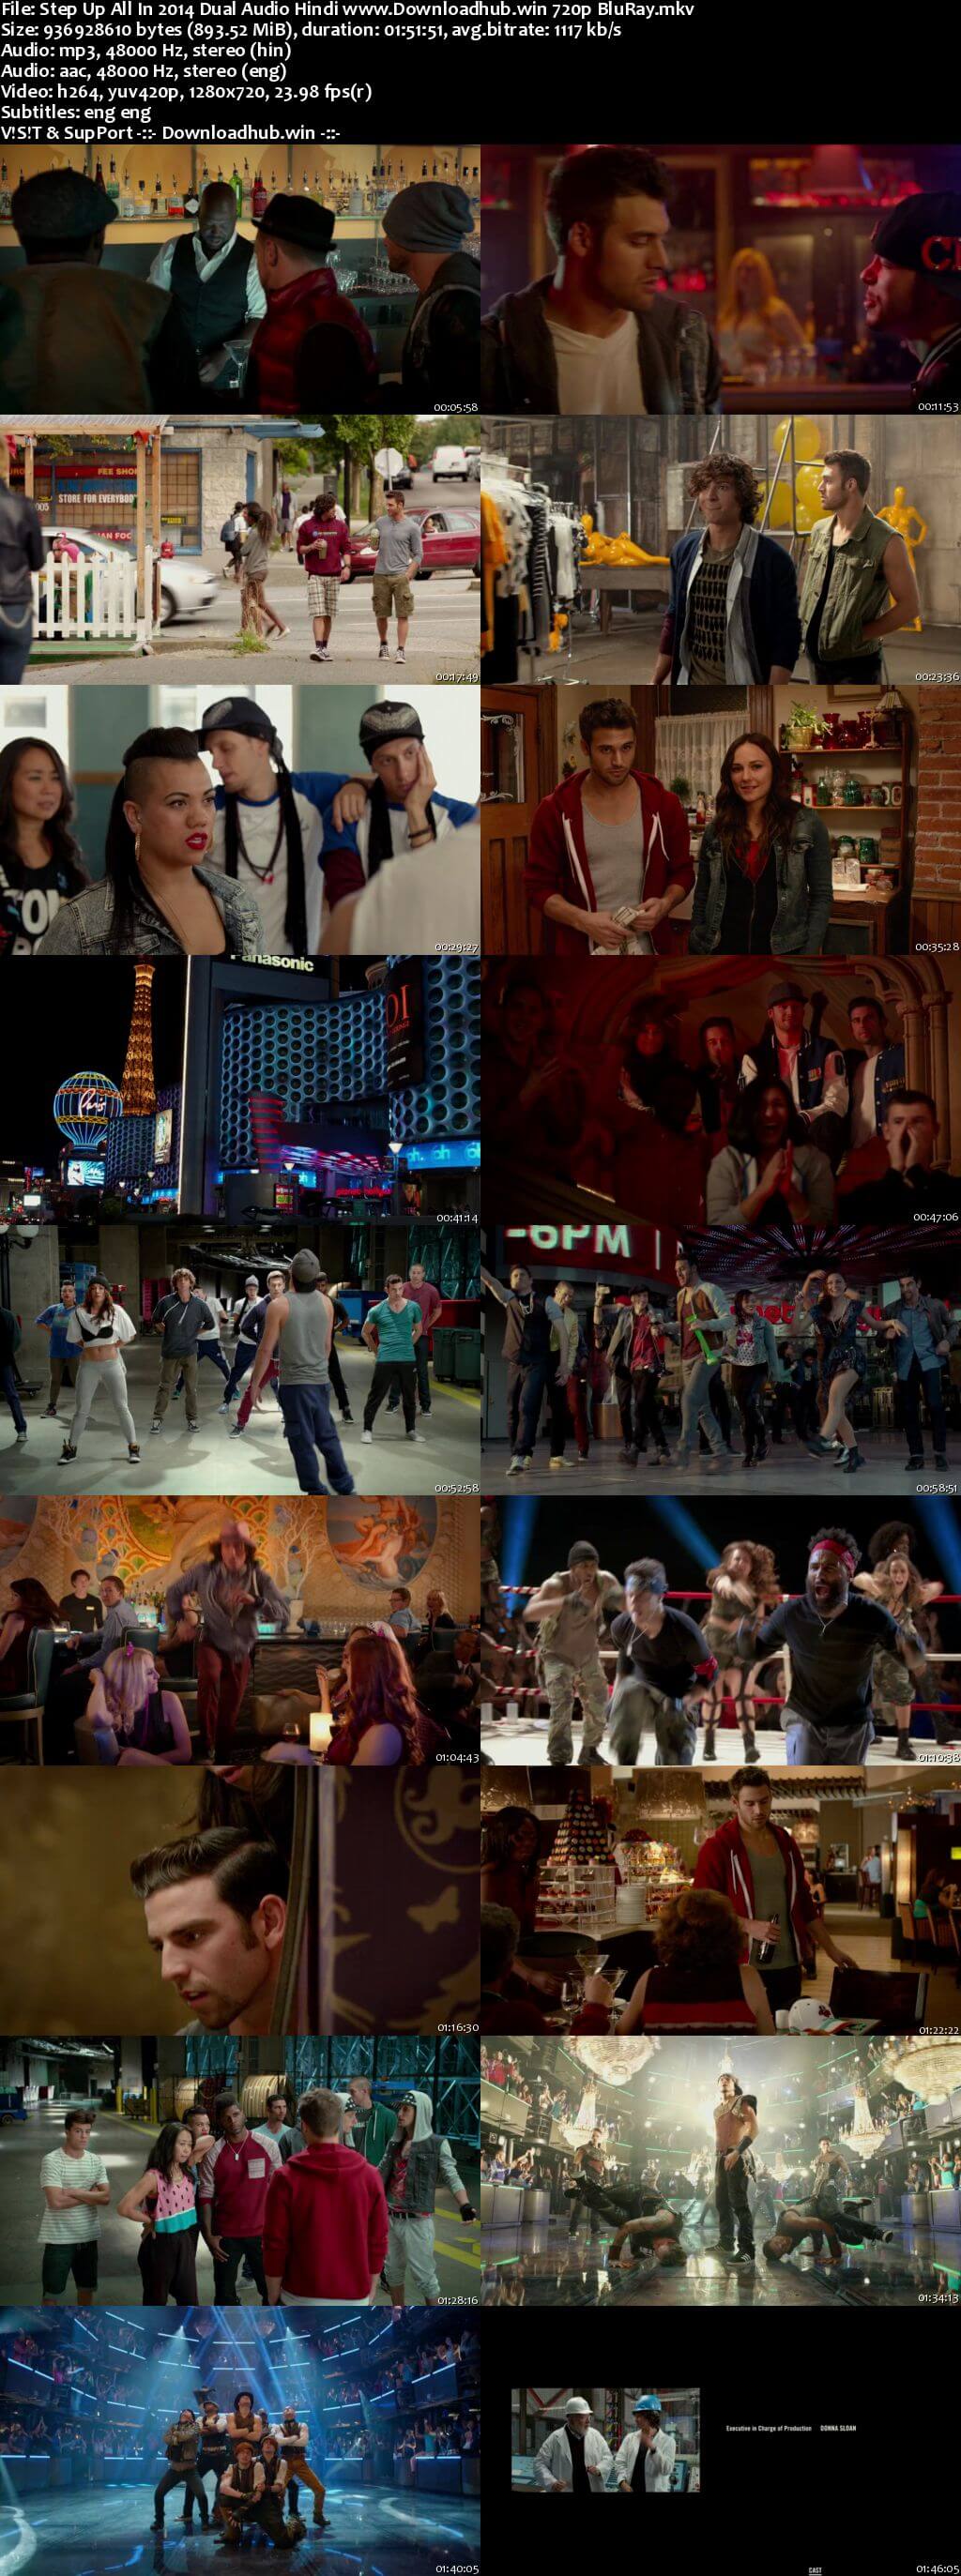 Step Up All In 2014 Hindi Dual Audio 720p BluRay ESubs